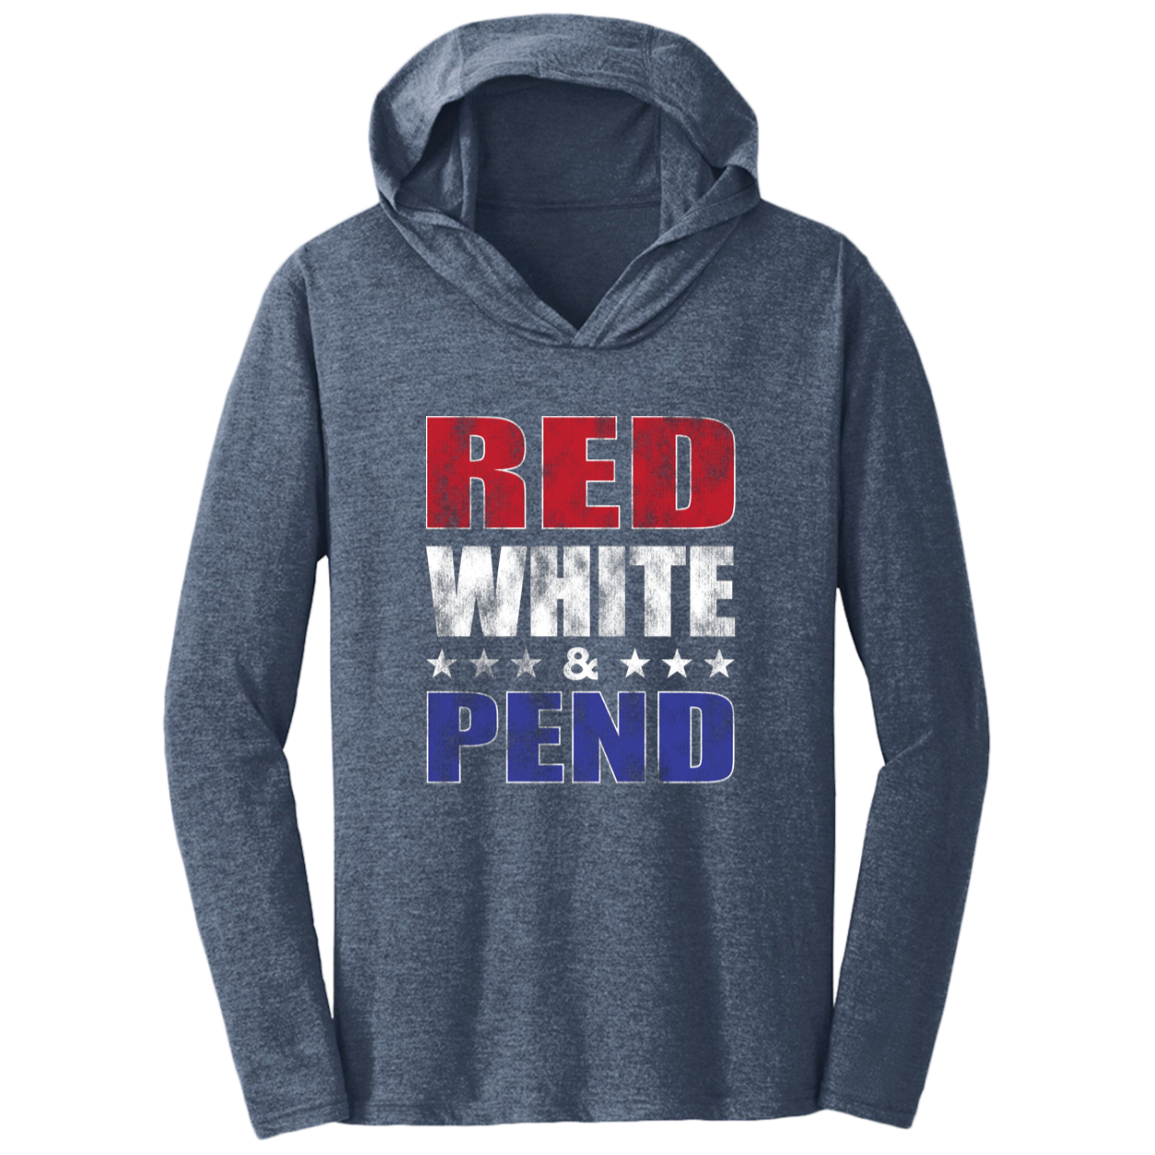 Red White & Pend Shirt Hoodie